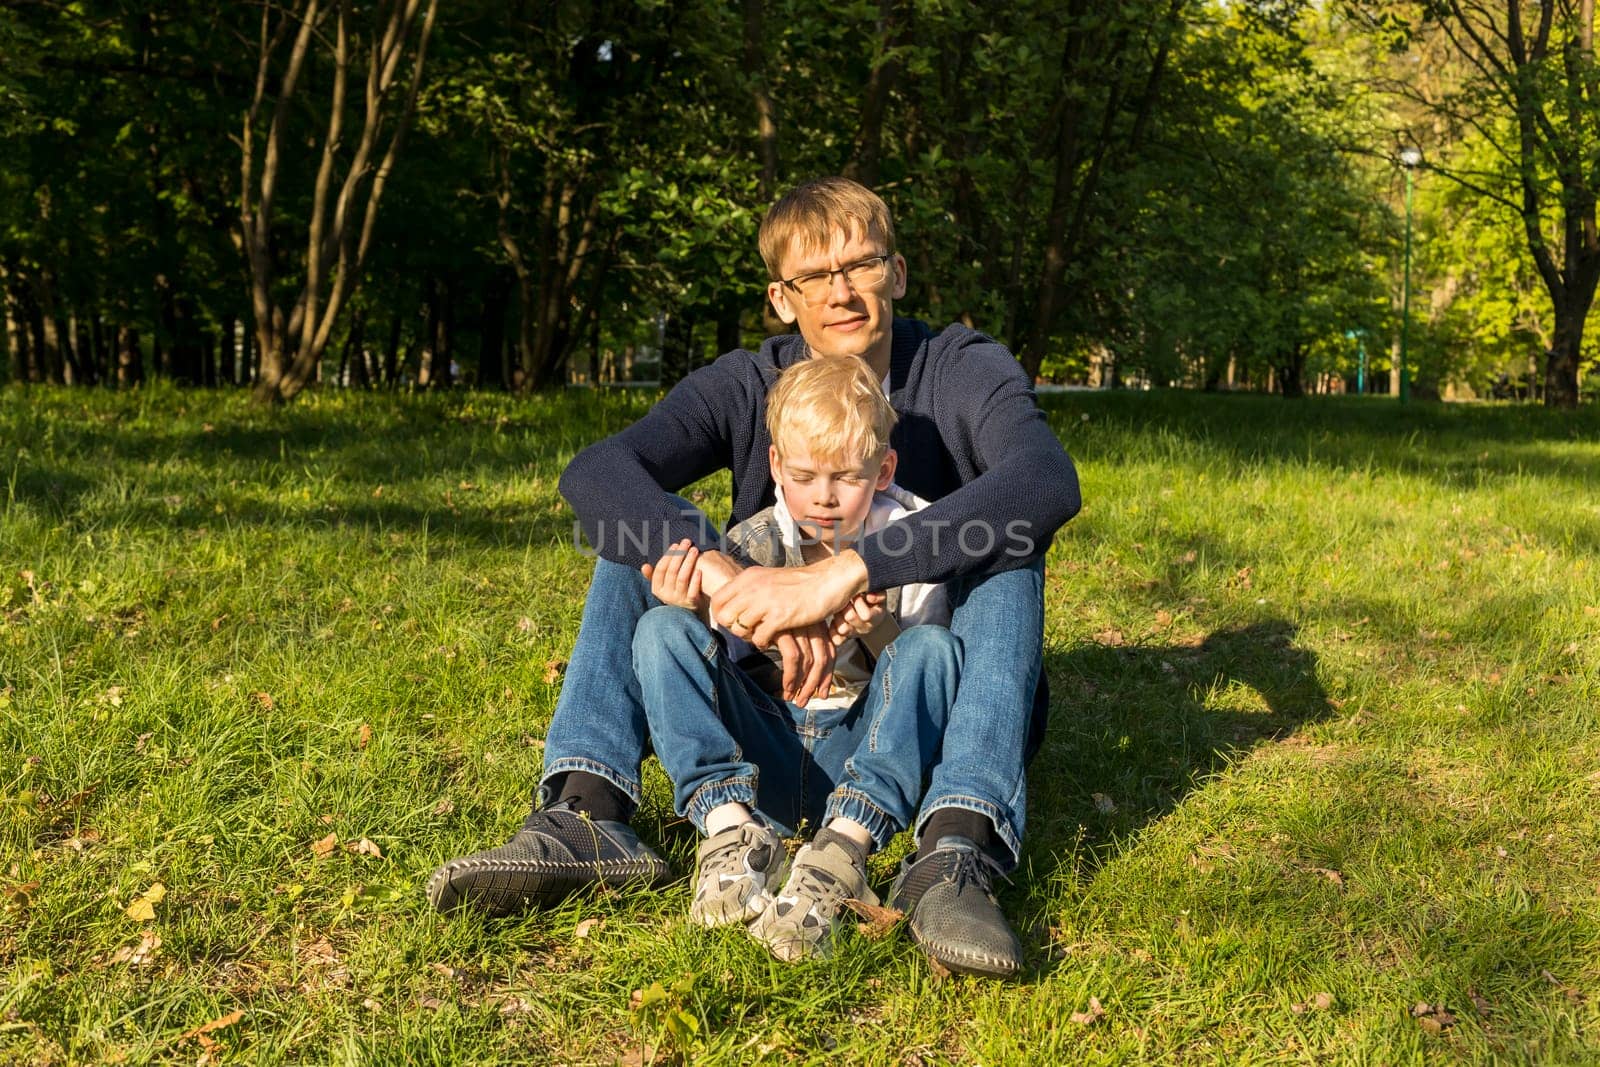 Father's Day. Father And Son Sit On Grass In Park, Enjoying Time Together. Summer Time. Happy Parenthood, Family Leisure Time, Emotional Connection, Love And Care. Horizontal Plane.